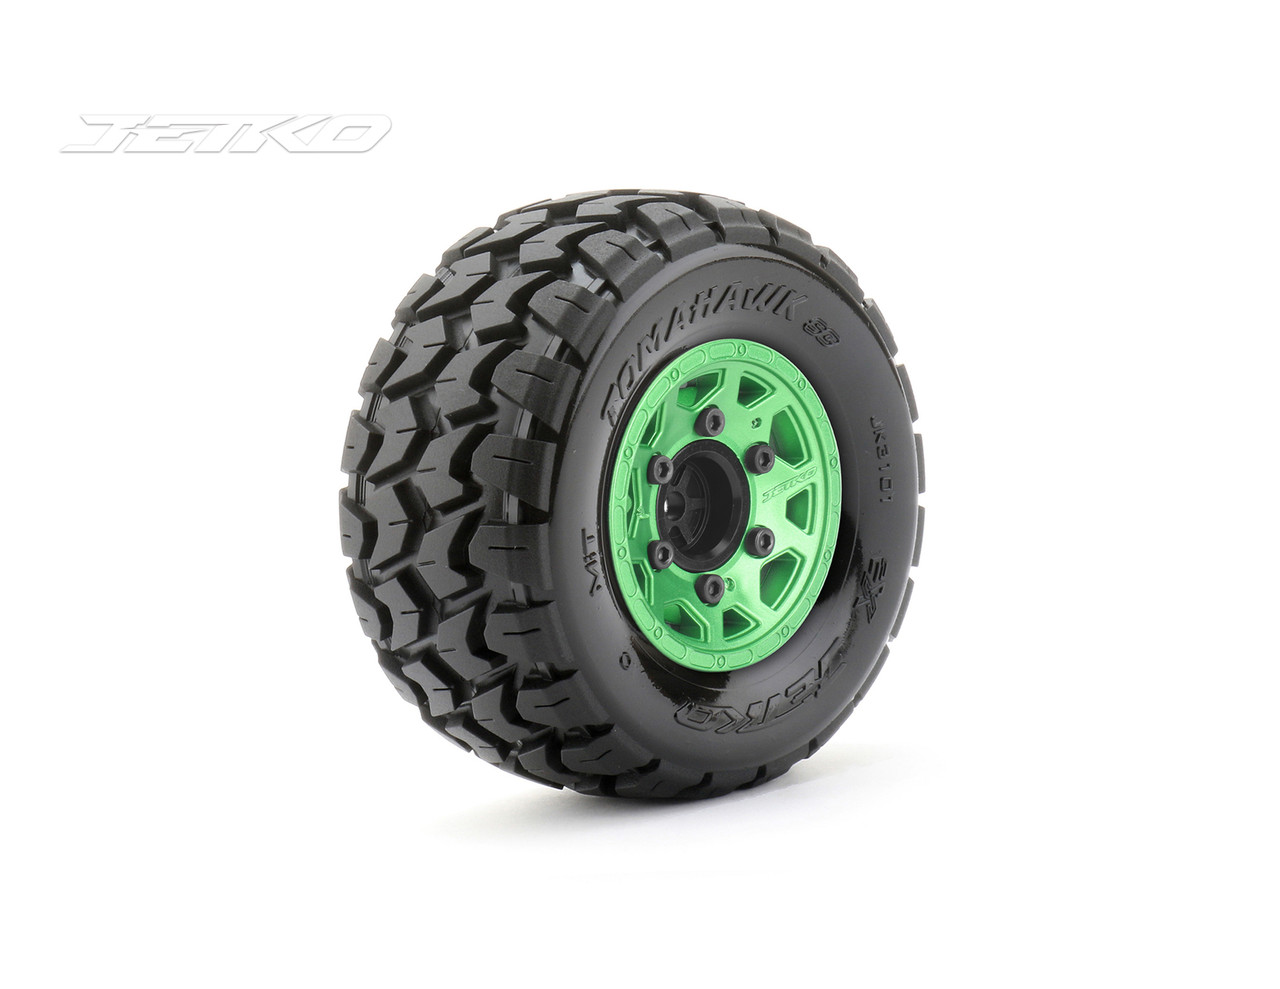 Jetko 1/10 ST 2.8 EX-Tomahawk Tires Mounted on Metal Green Claw Rims, Medium Soft, Glued, 12mm 0" Offset